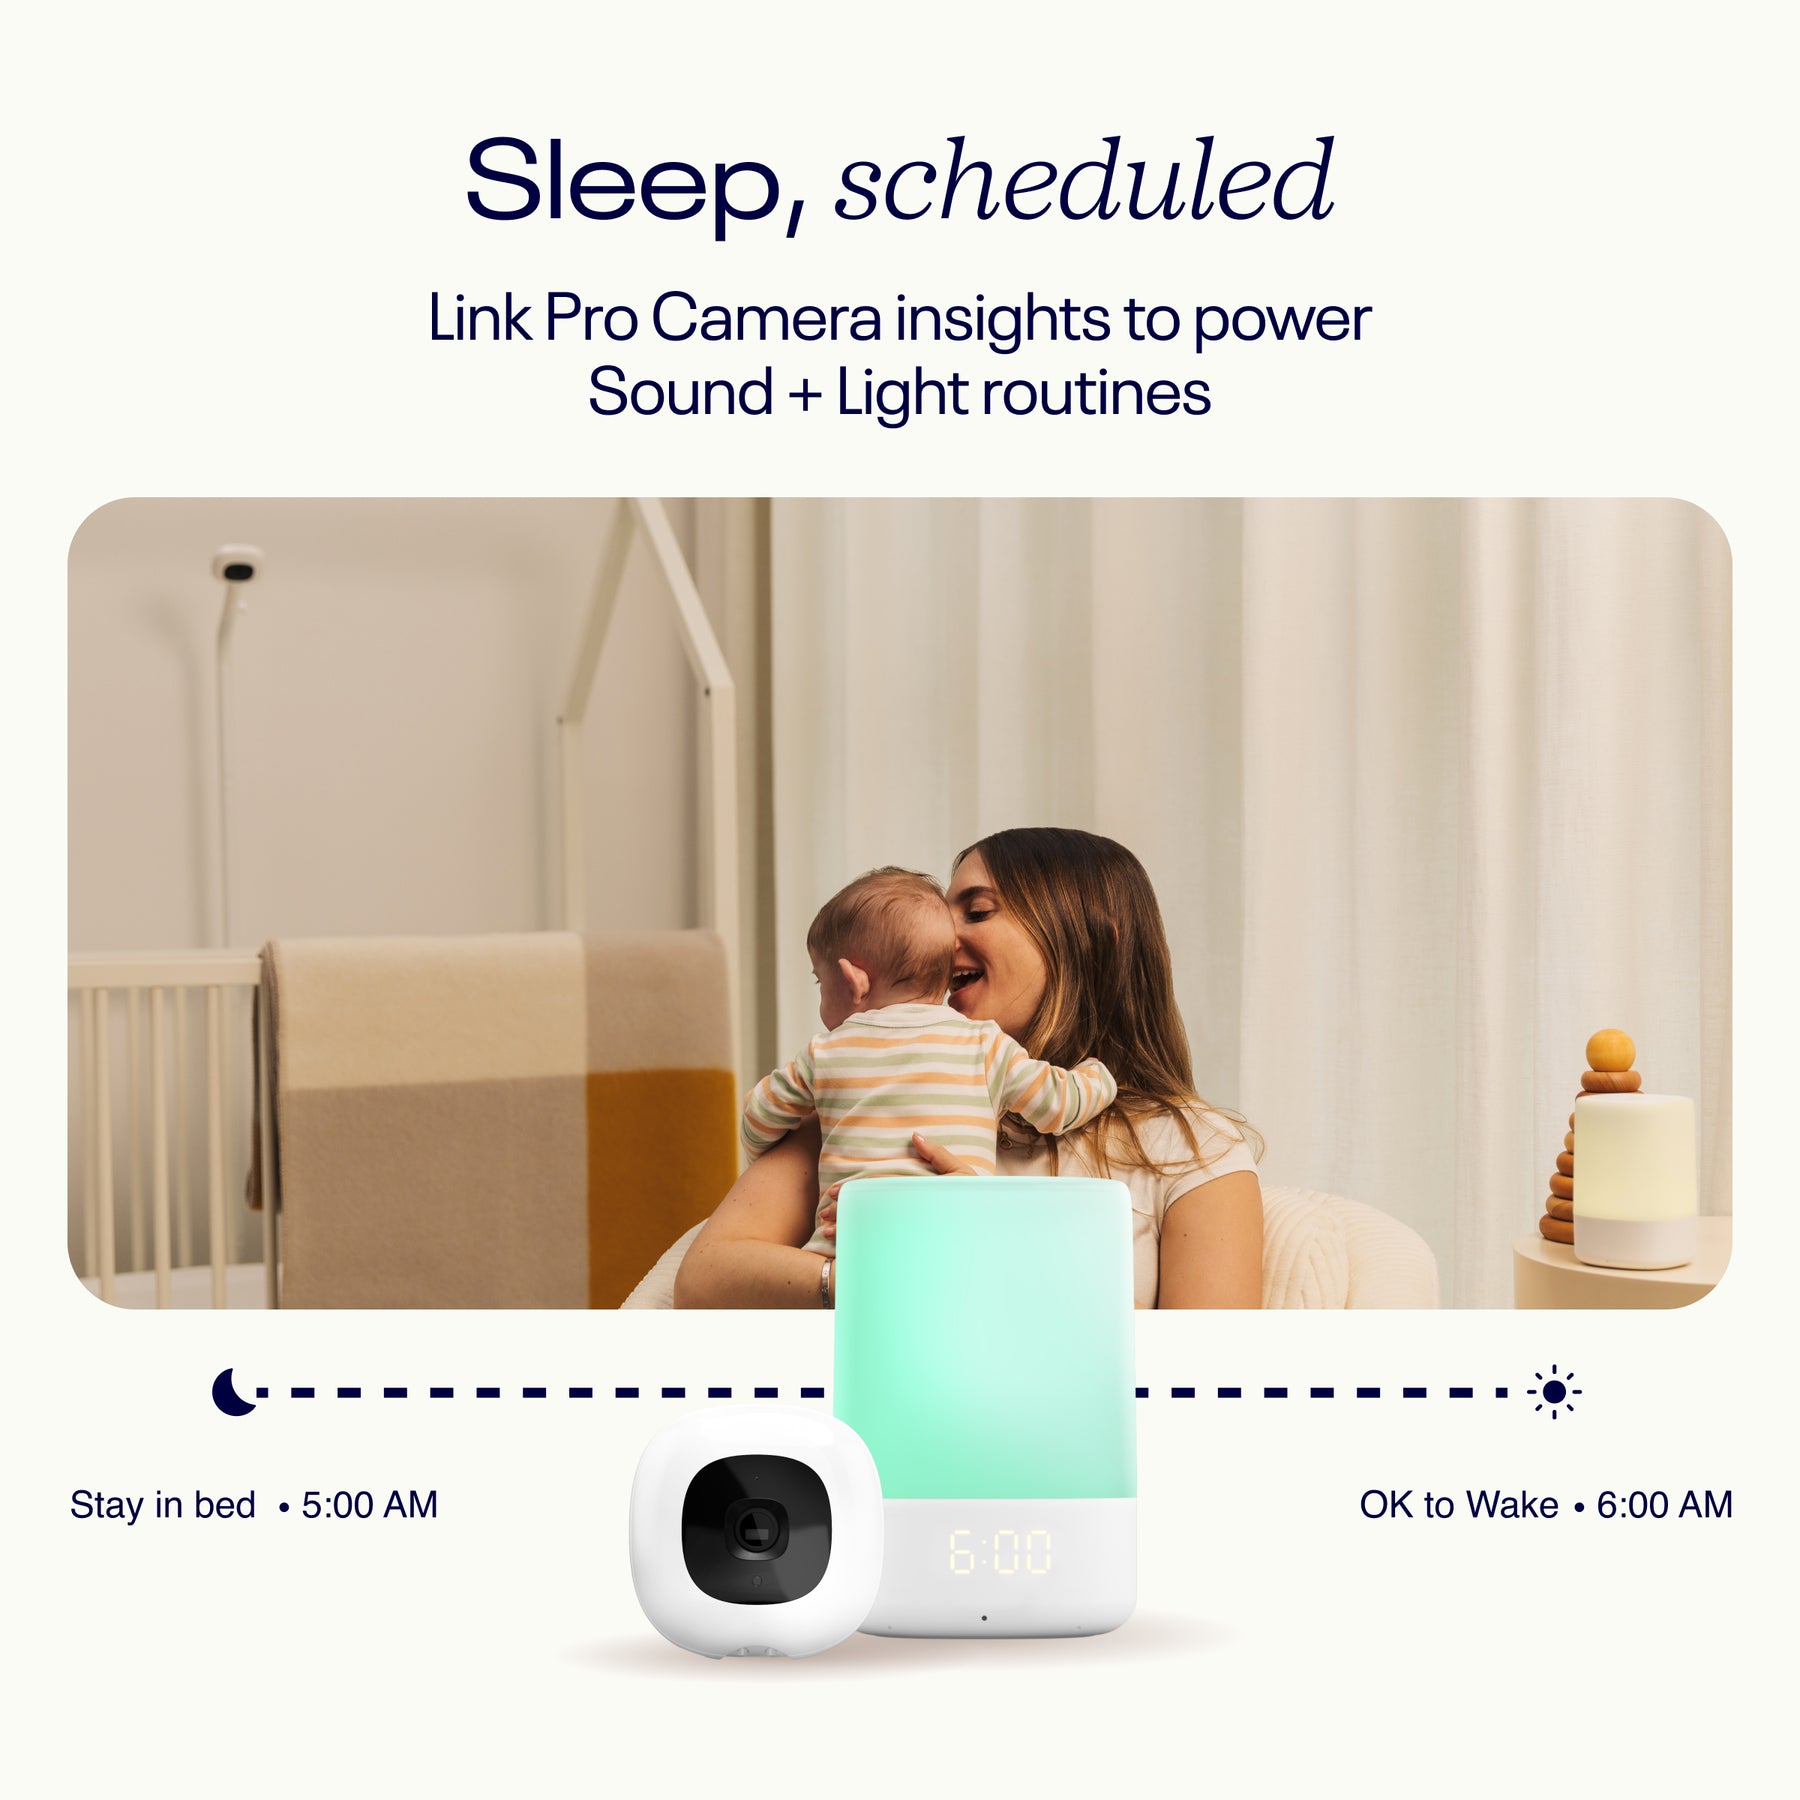 Predictive Pairing using Pro Camera insights linked to Sound + Light to create a customized smart sleep ecosystem